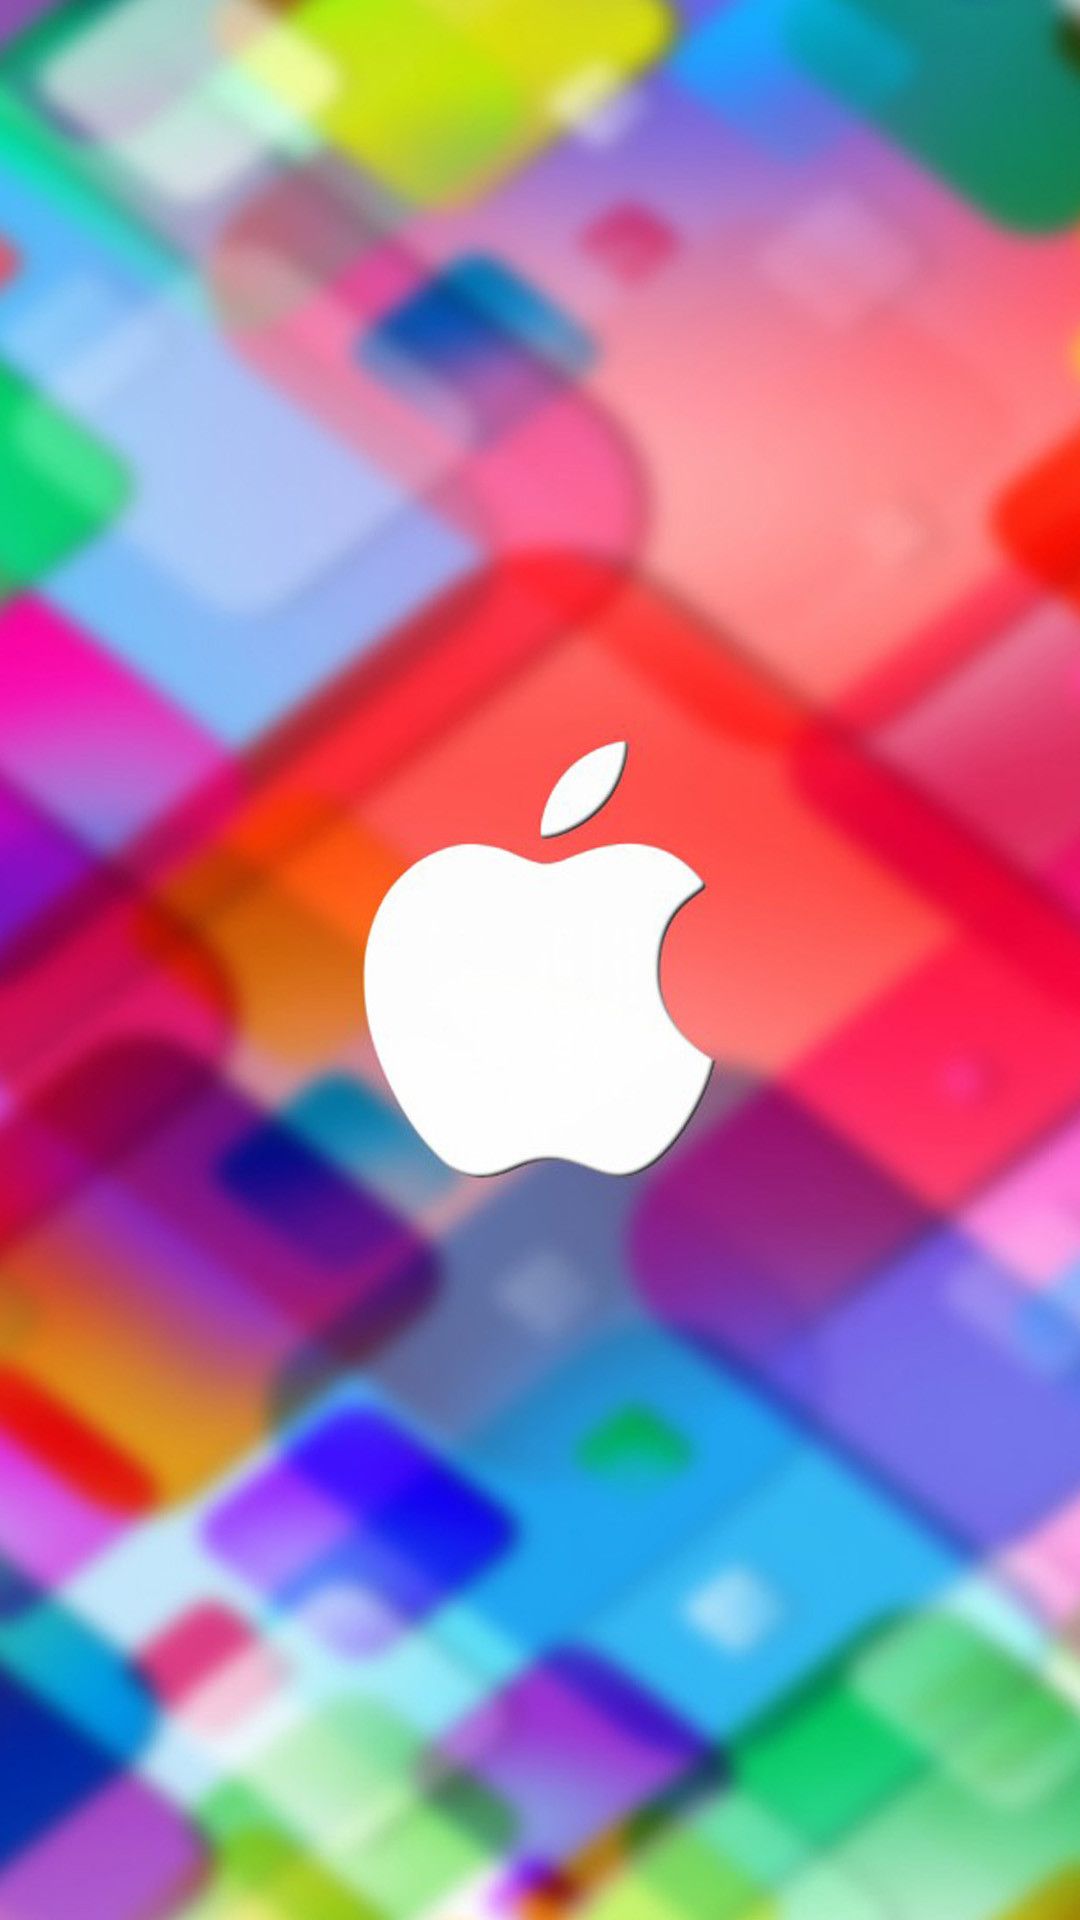 Apple Colourful Wallpaper Designed For iPhone